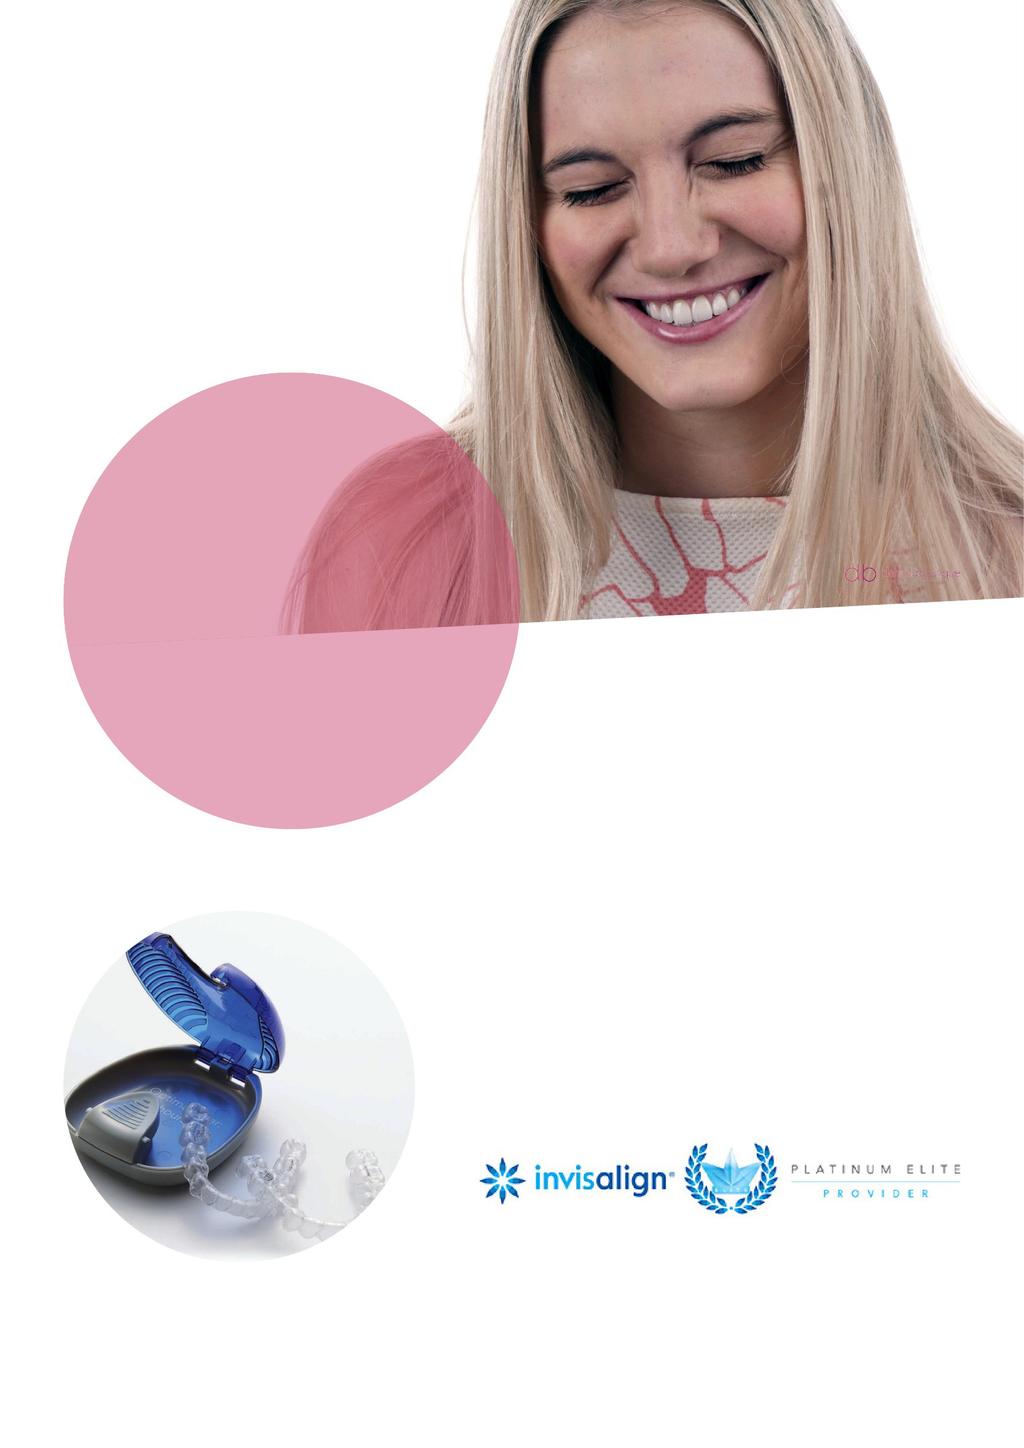 What is Invisalign? And how does it improve your life?